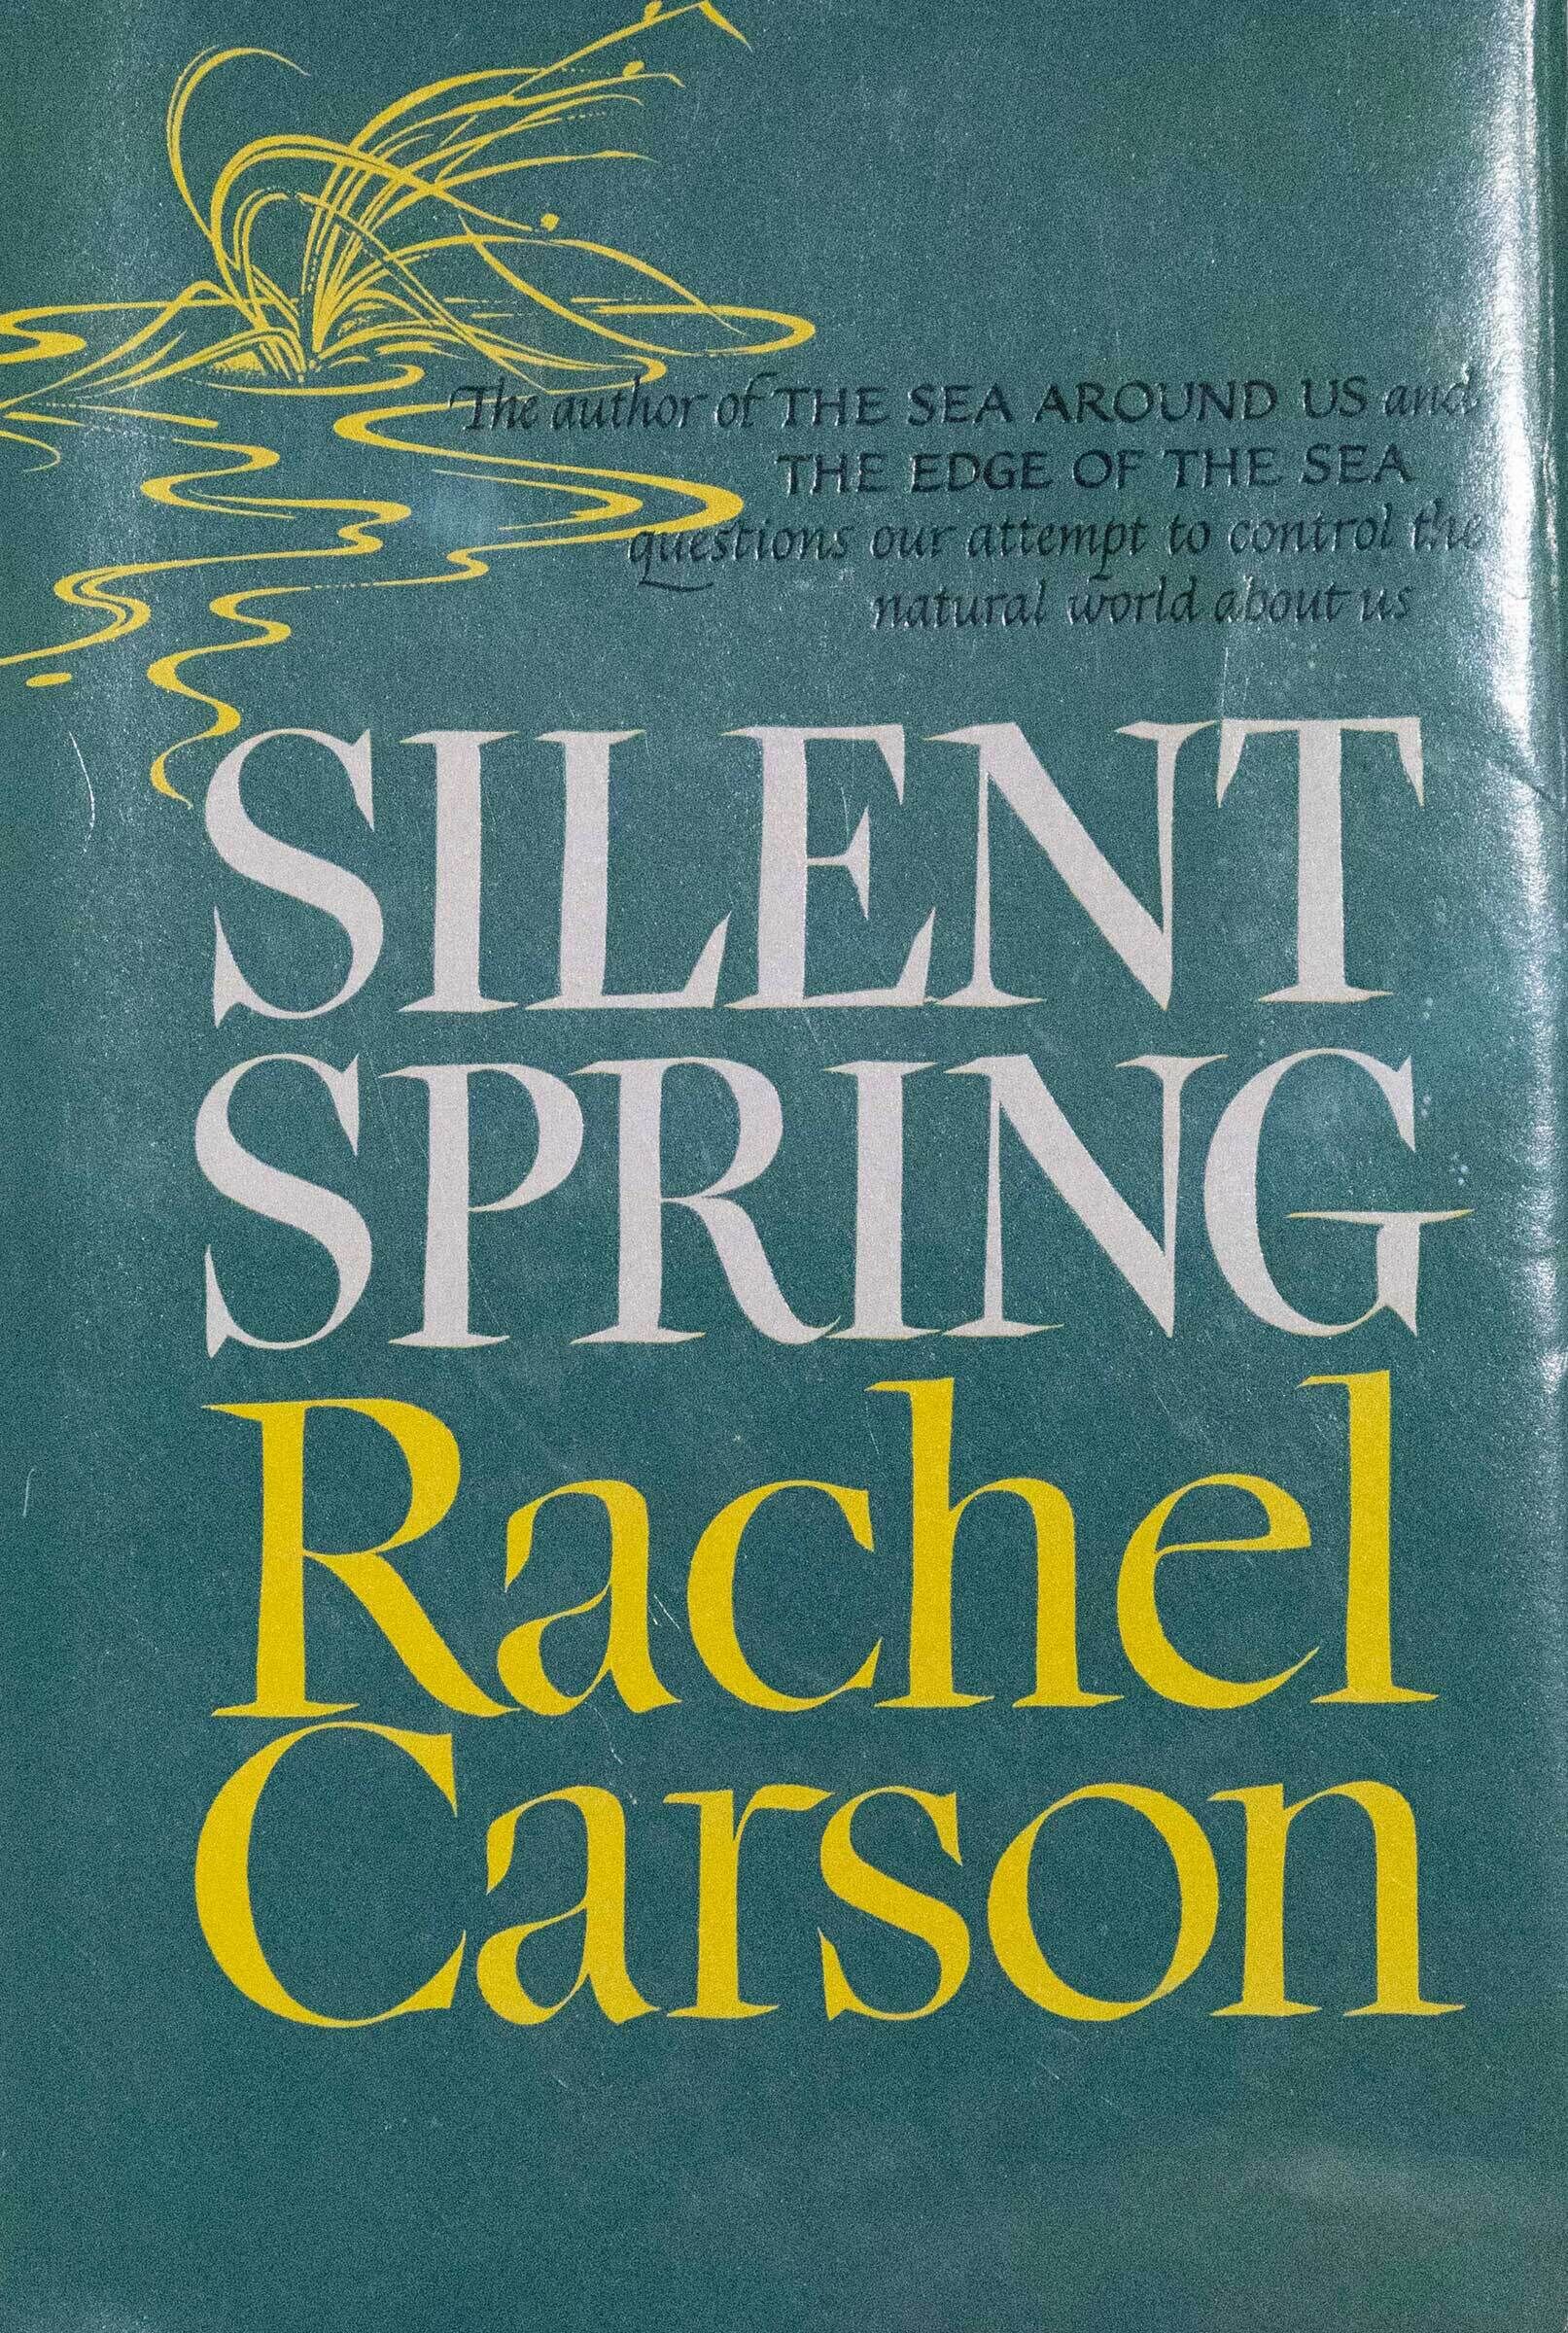 Cover of "Silent Spring" by Rachel Carson, featuring a green background with yellow and white text and an abstract yellow design.